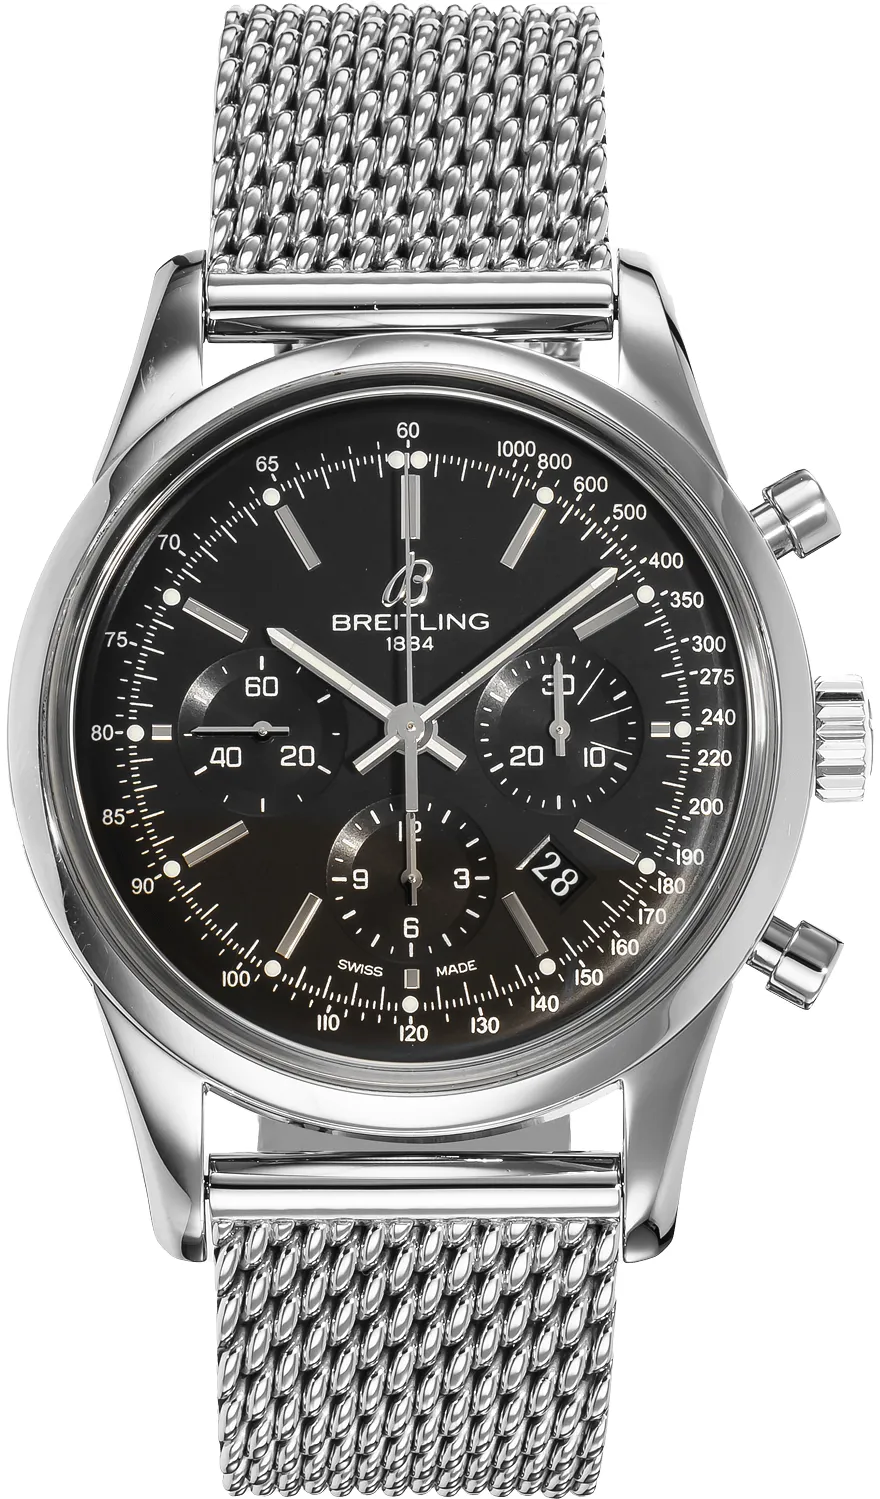 Breitling Transocean Chronograph AB 0152 43mm Stainless steel Black